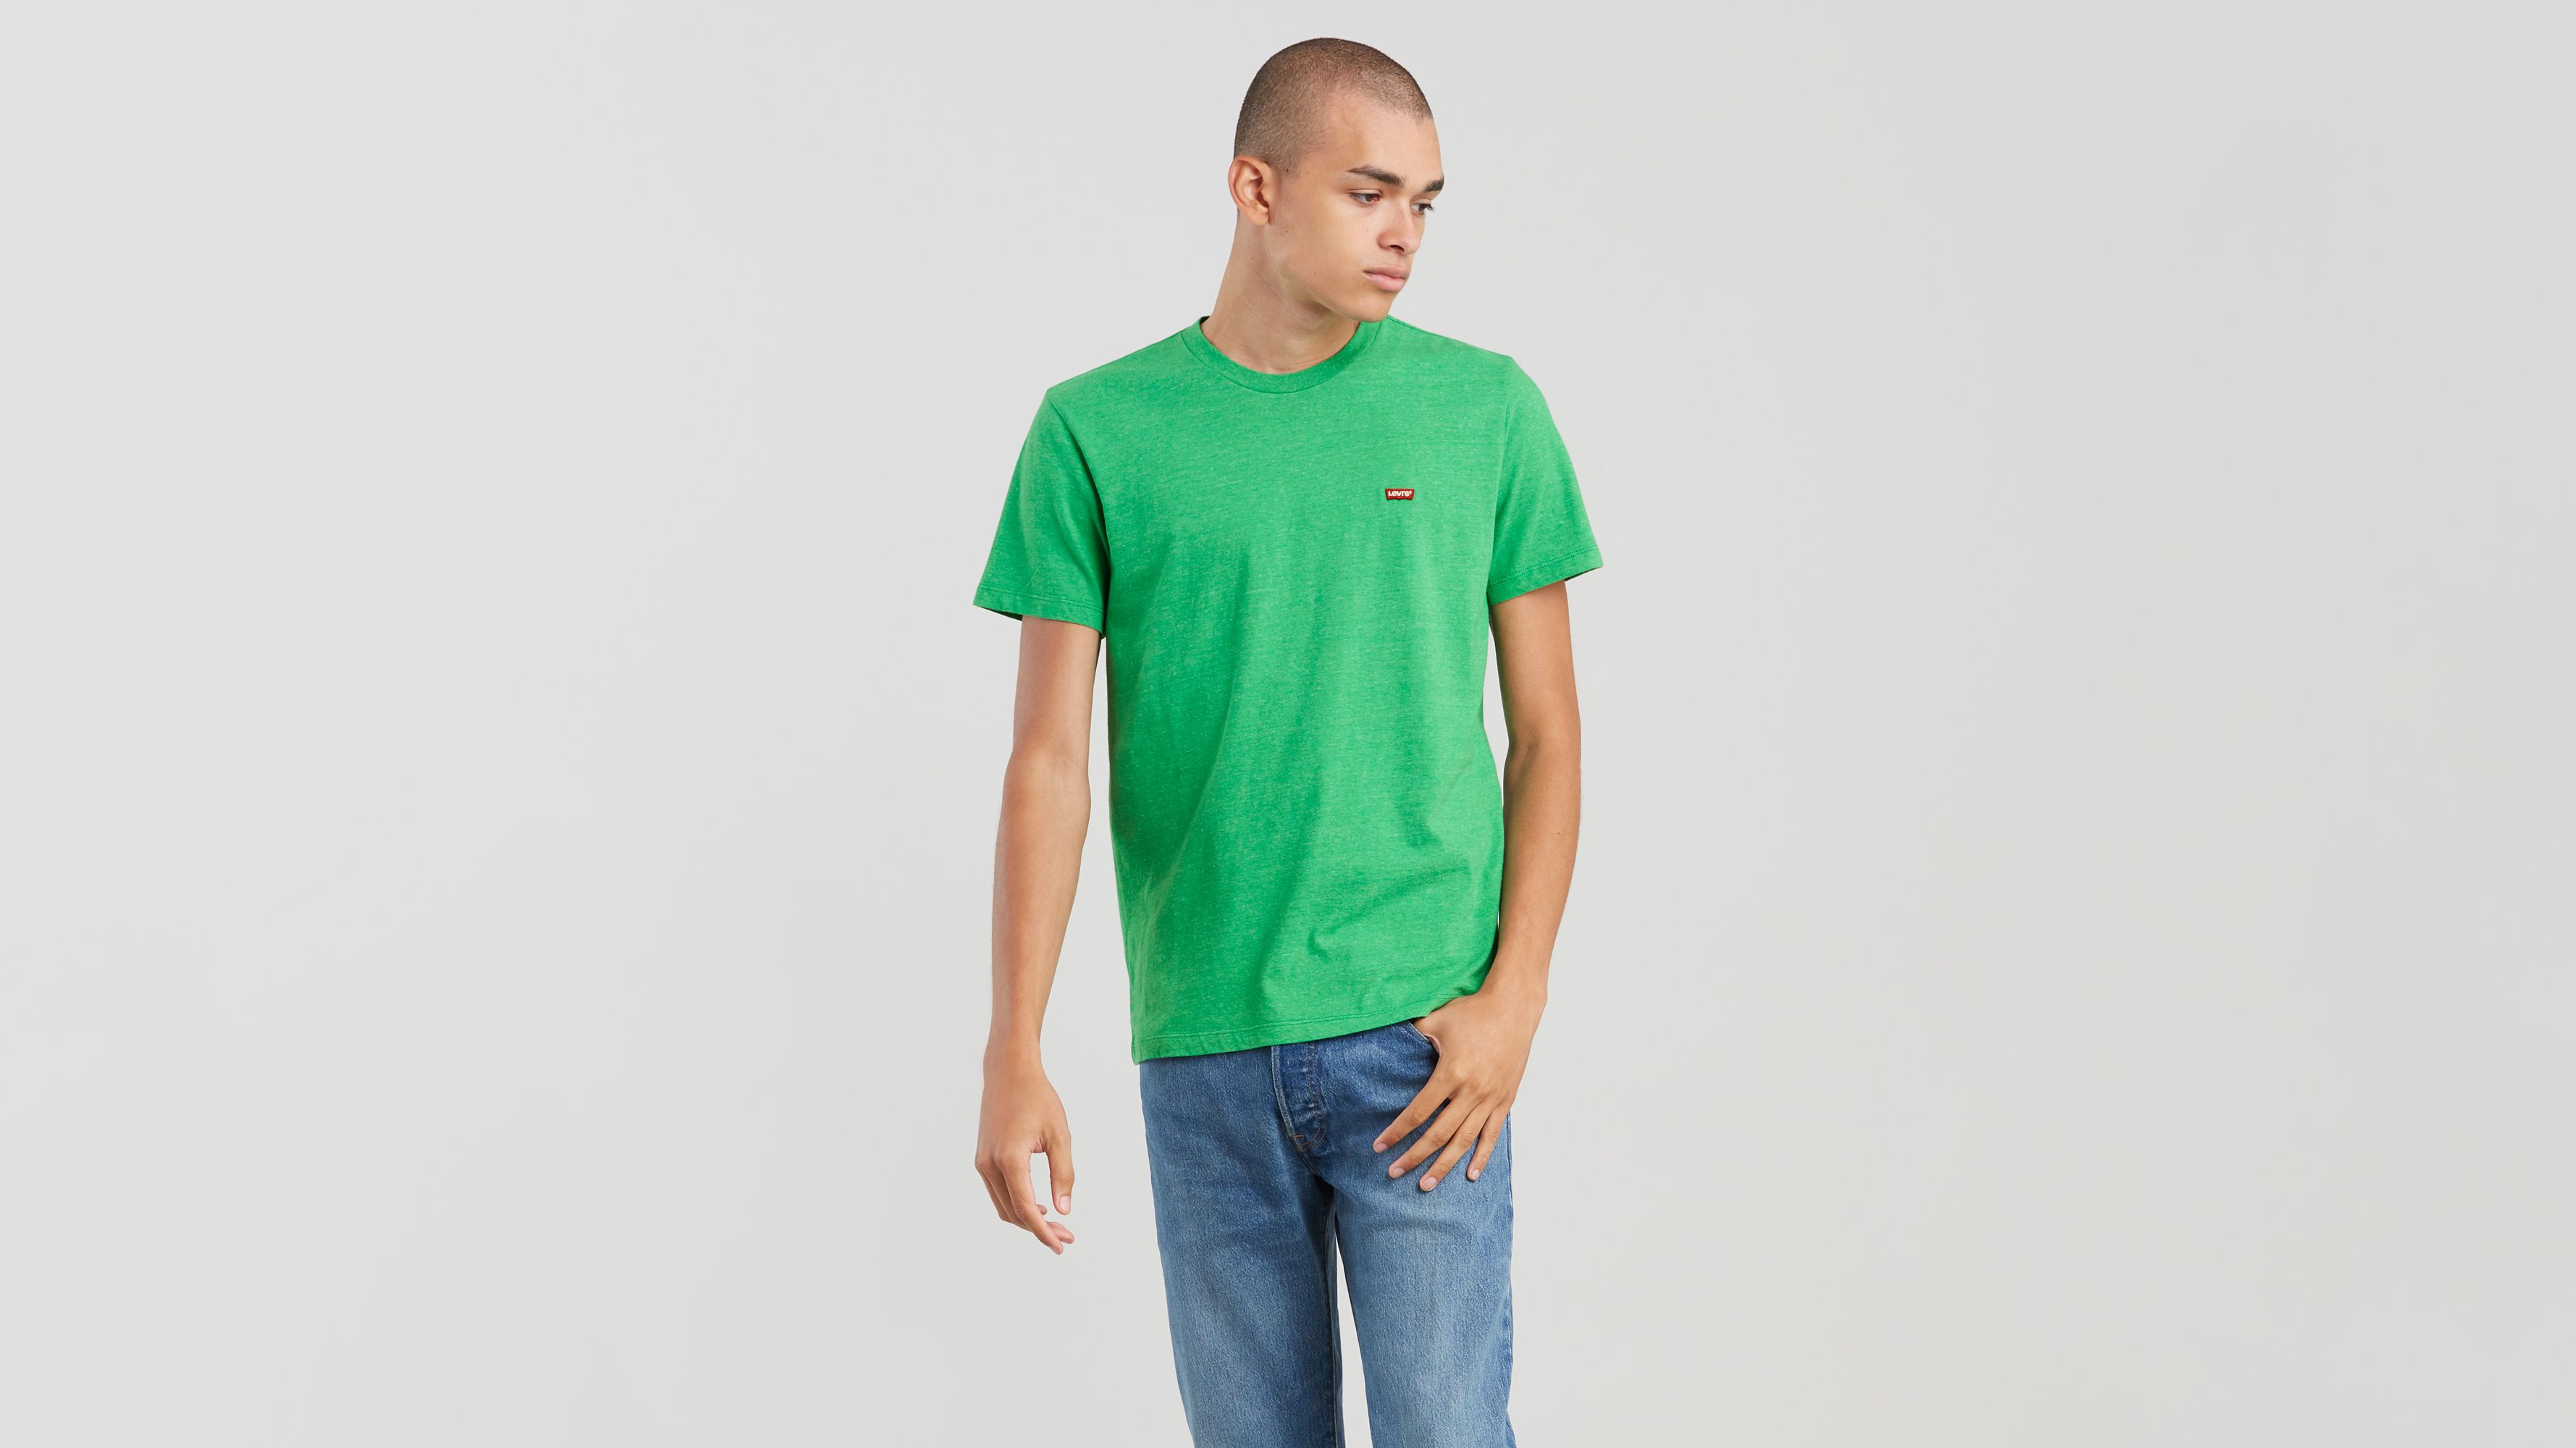 levis green jelly